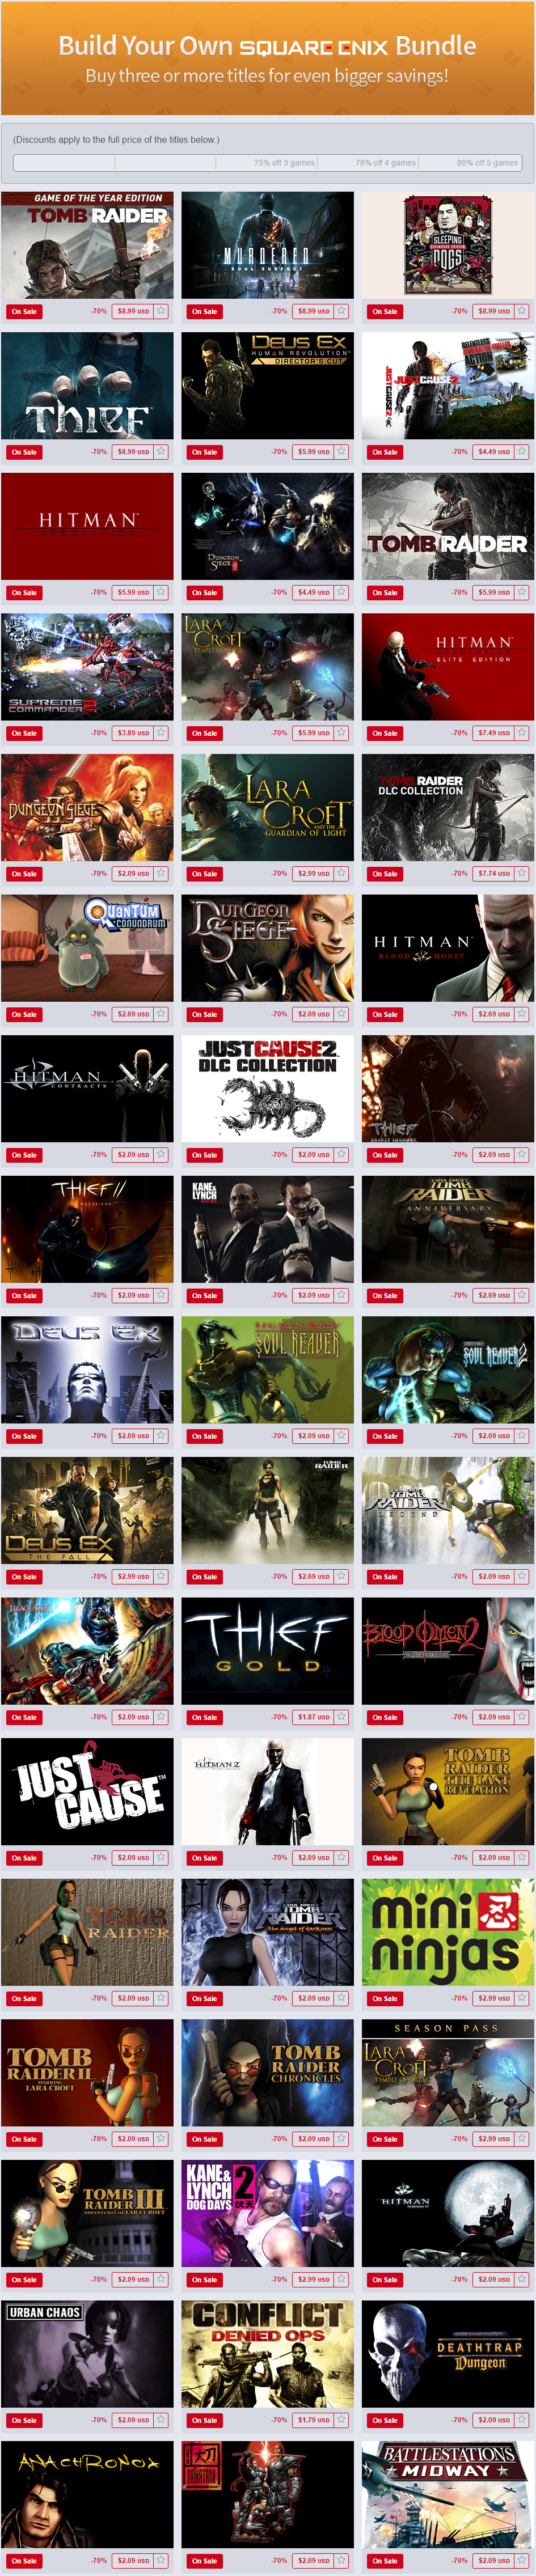 The Humble Store- Birthday Sale - SQUARE ENIX.png